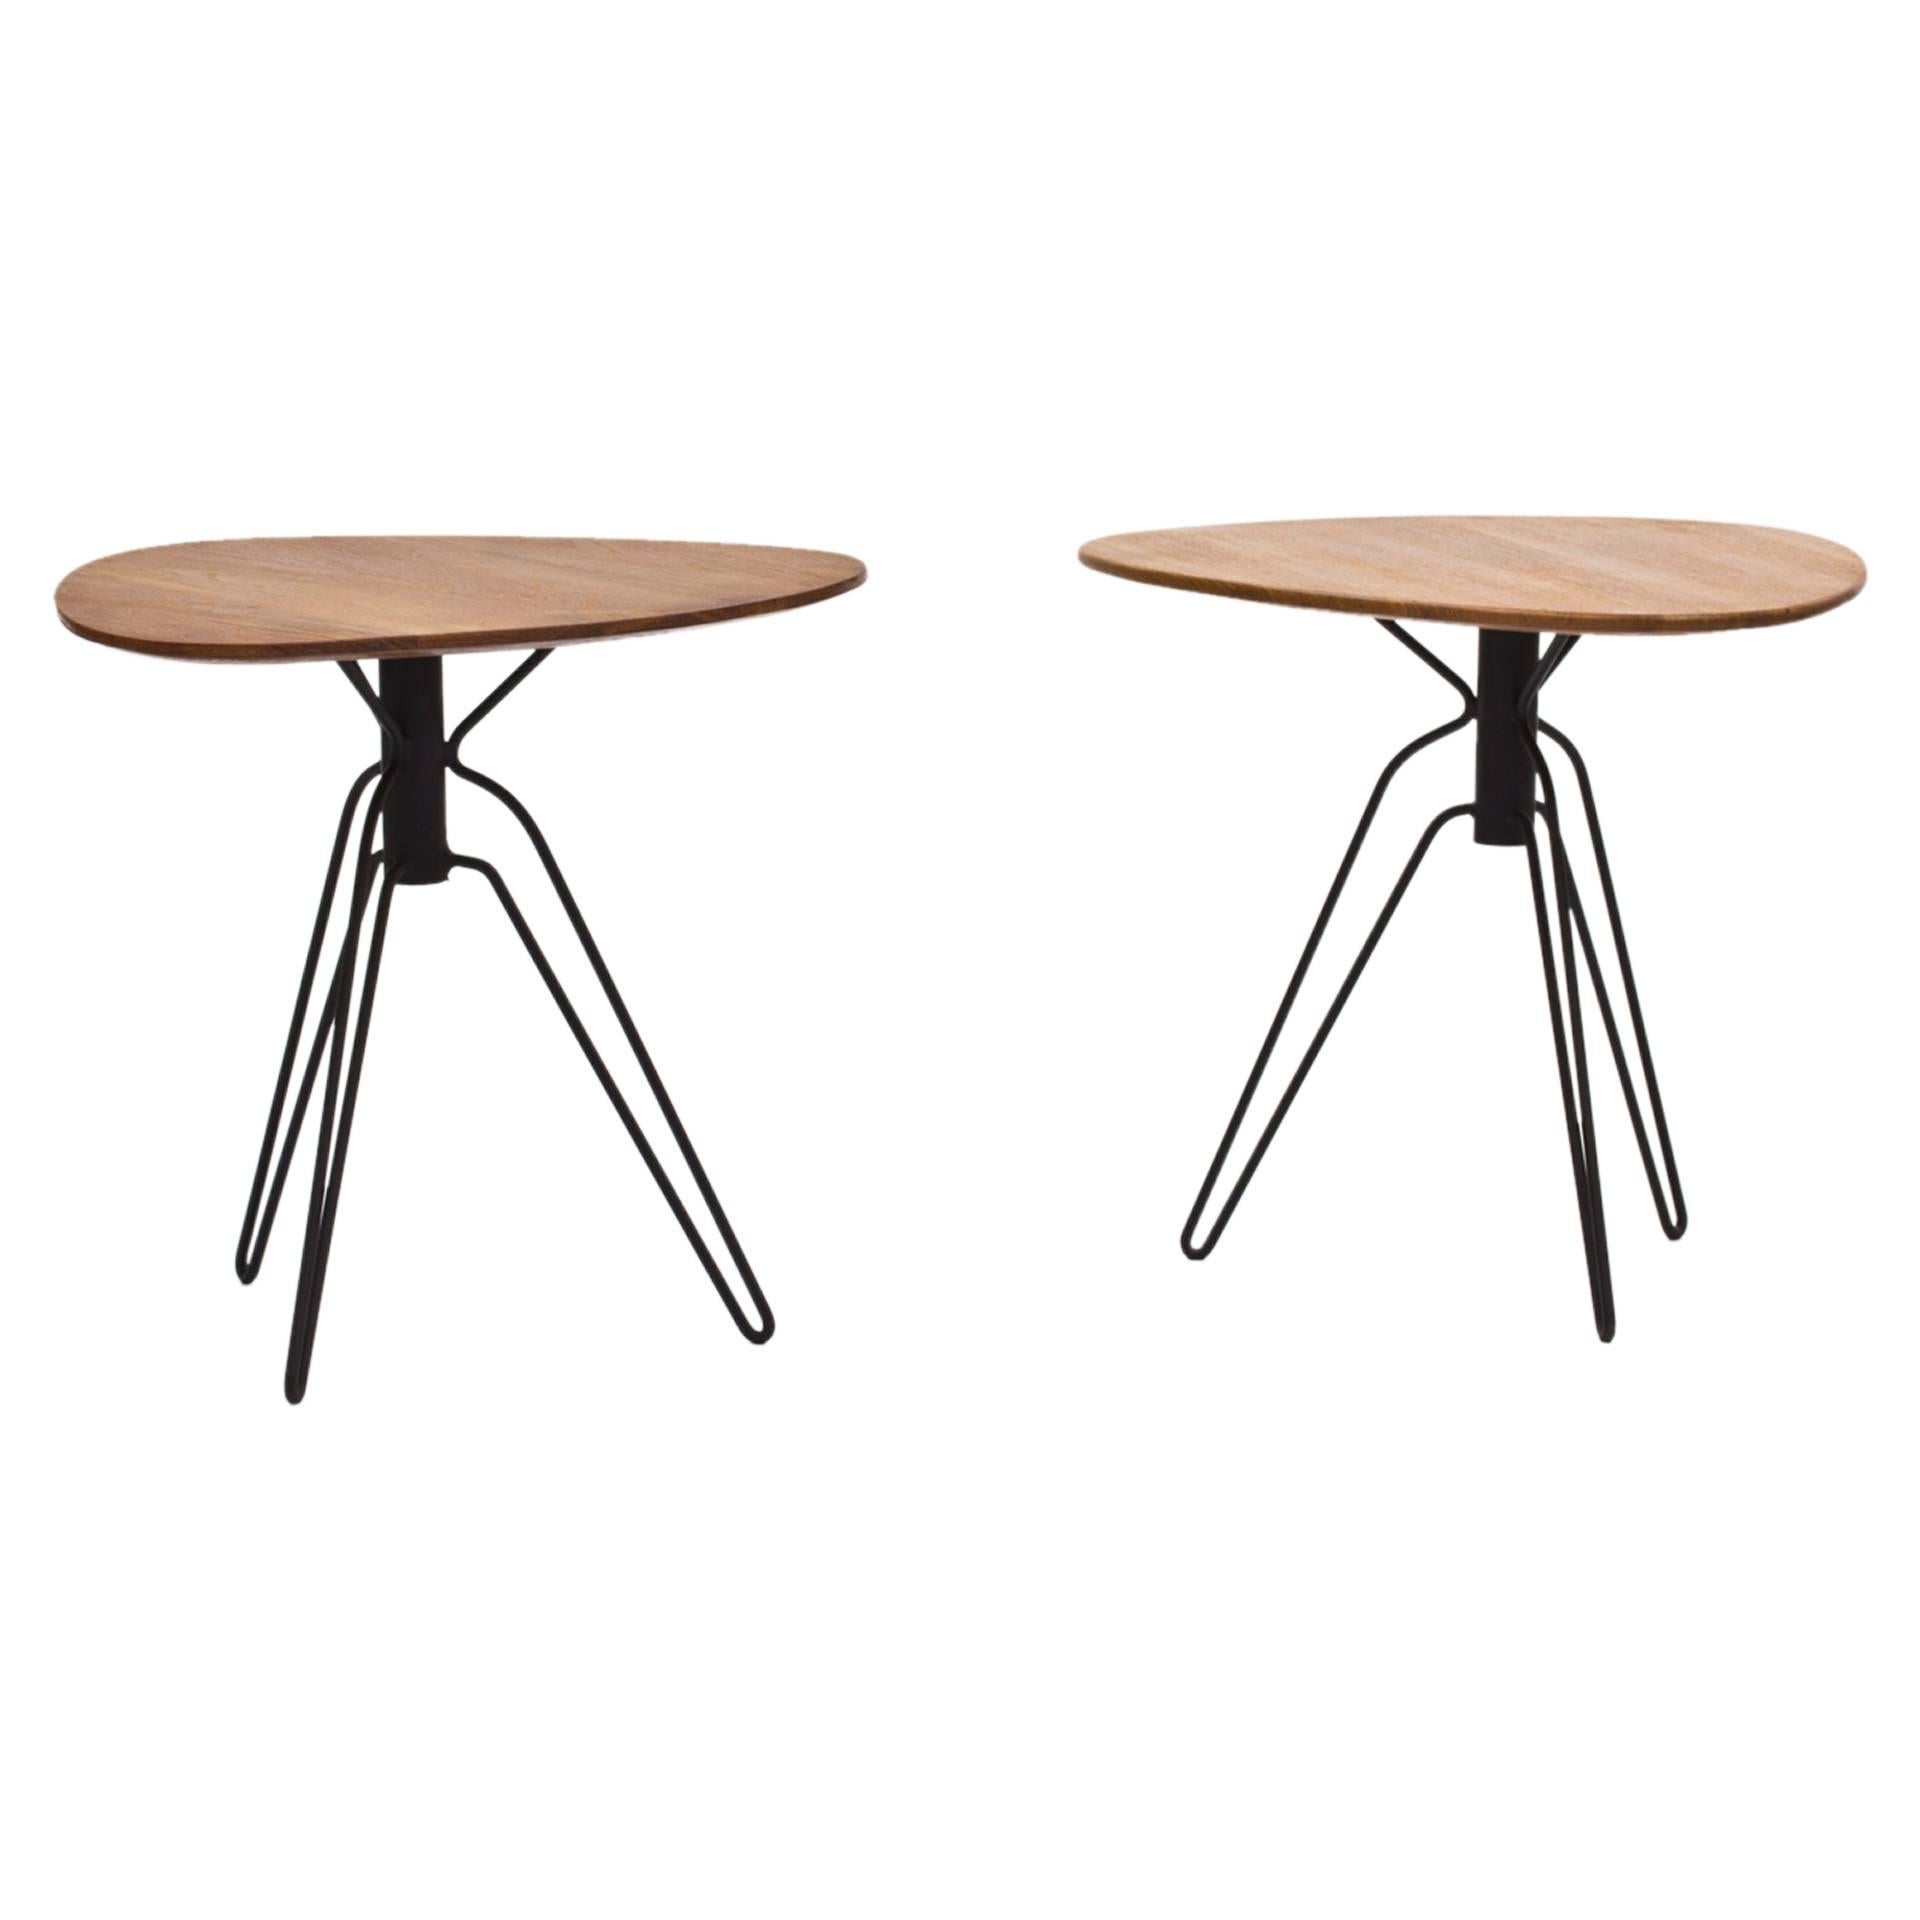 Pair of End Tables by Hans Agne Jakobsson